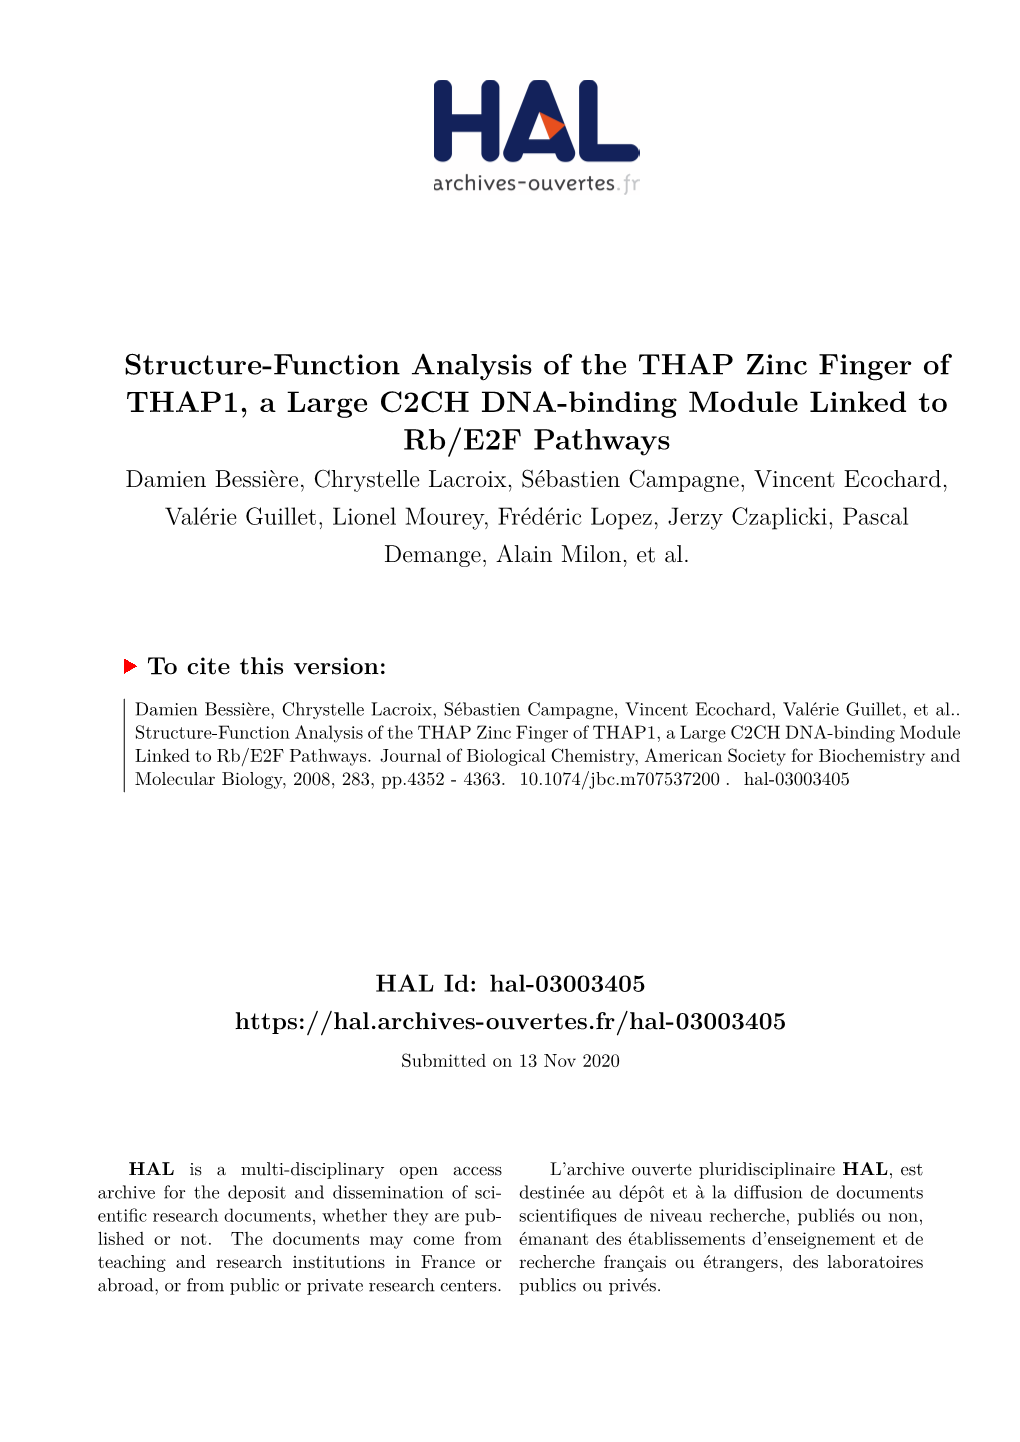 Structure-Function Analysis of the THAP Zinc Finger of THAP1, A